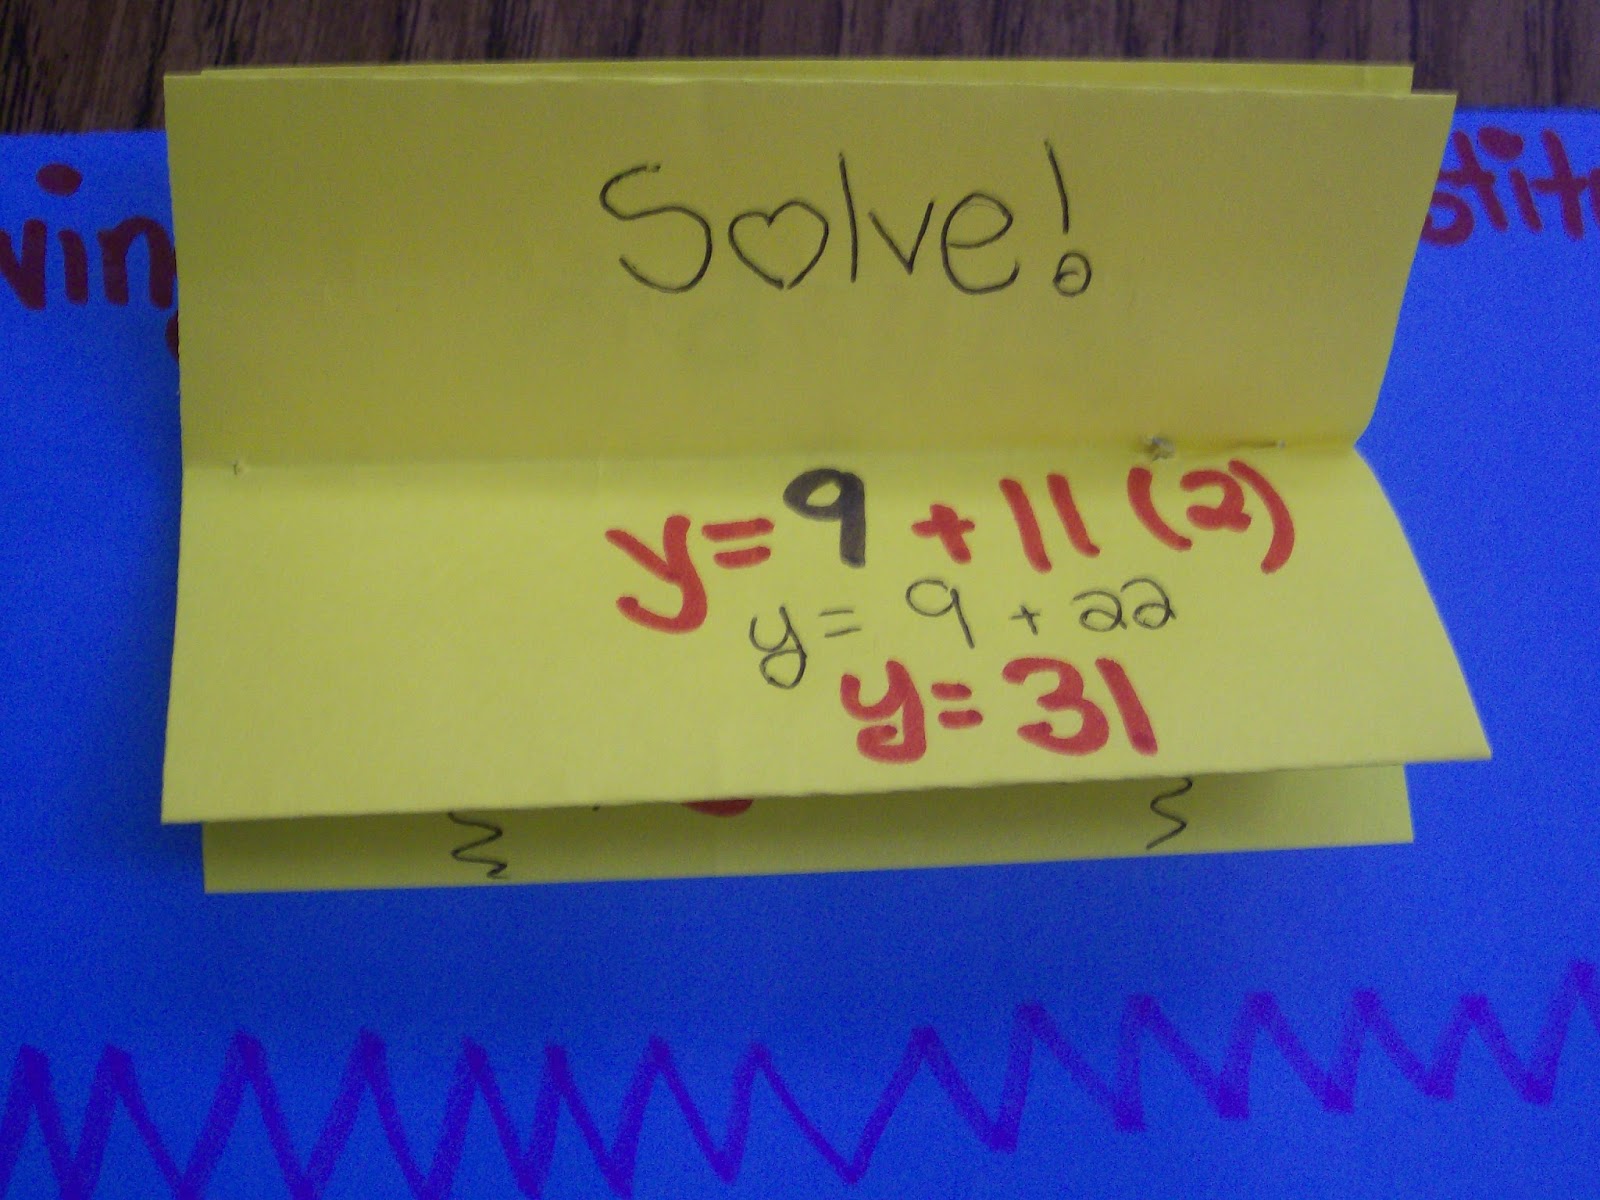 Solving Systems of Equations by Substitution Foldable INB Page algebra math interactive notebook